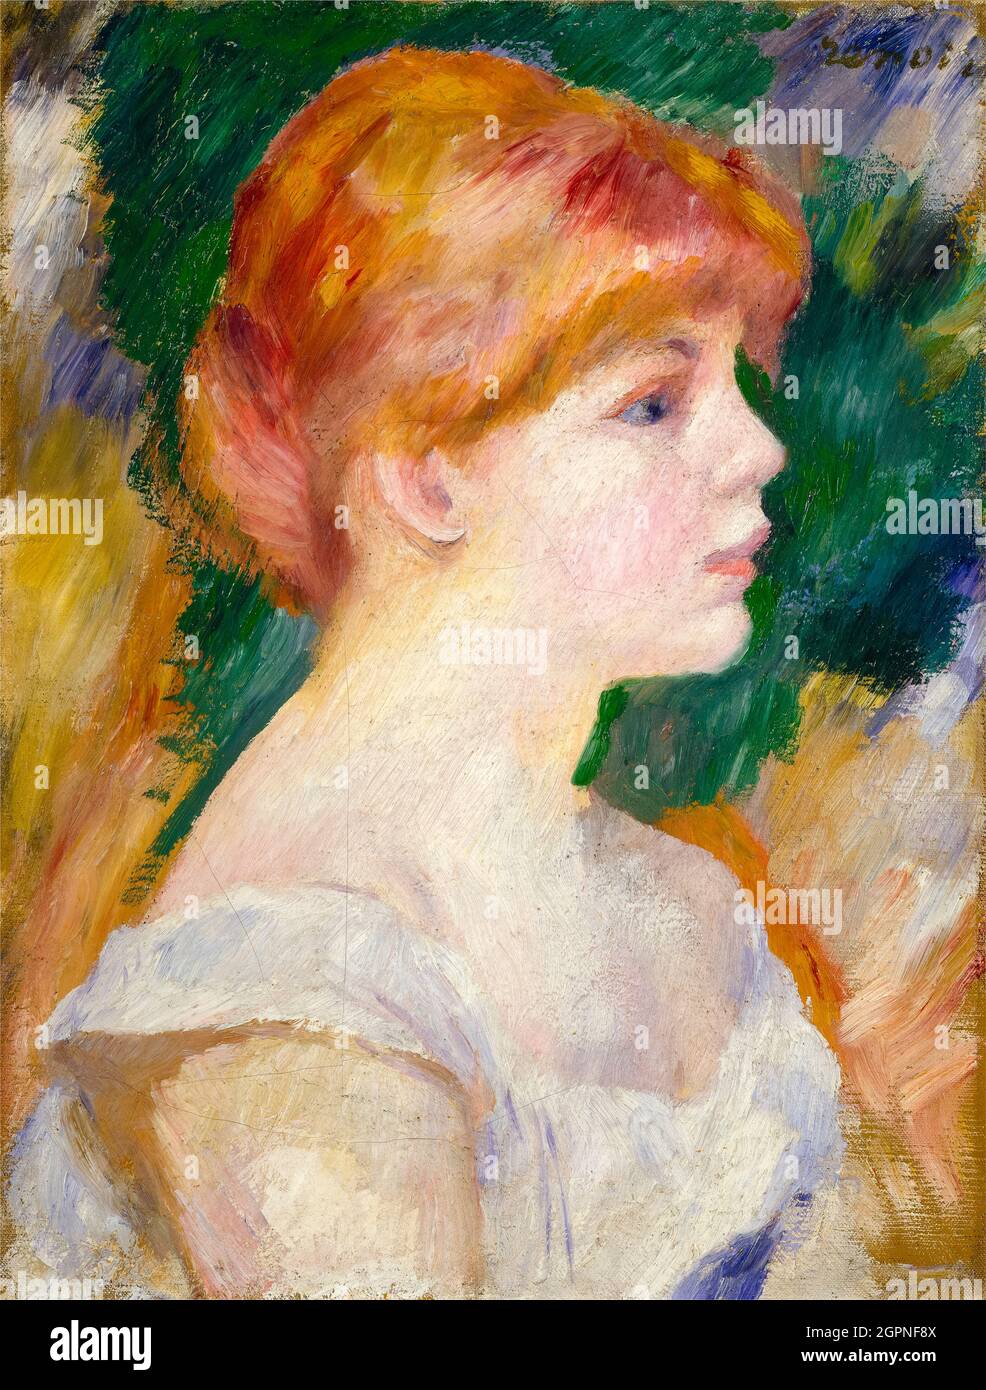 Suzanne Valadon (1865-1938), French painter and Artist's Model, portrait painting by Pierre Auguste Renoir, circa 1885 Stock Photo